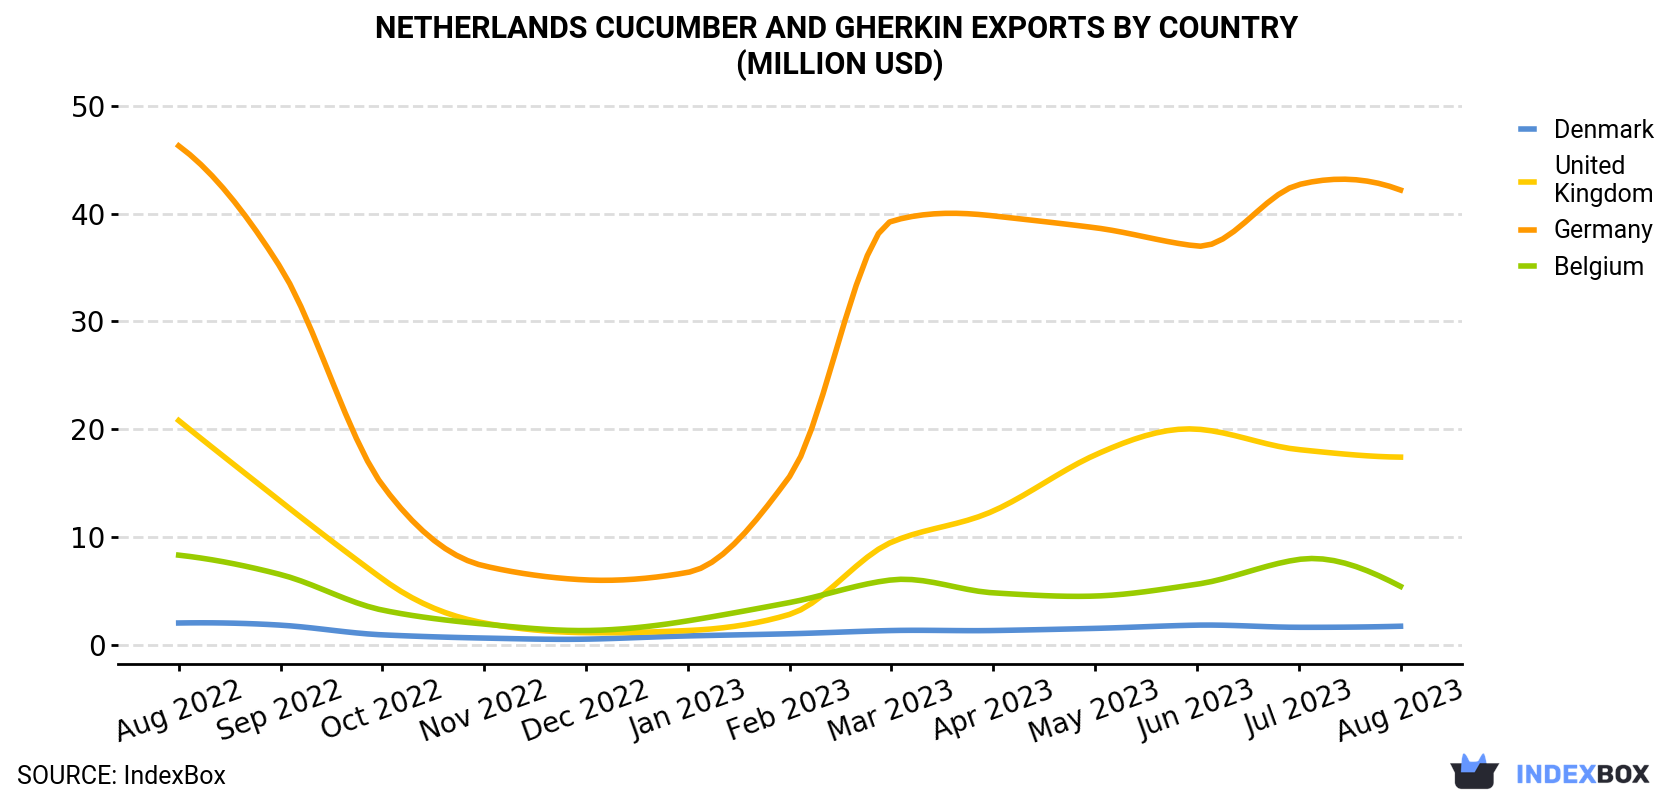 Netherlands Cucumber And Gherkin Exports By Country (Million USD)